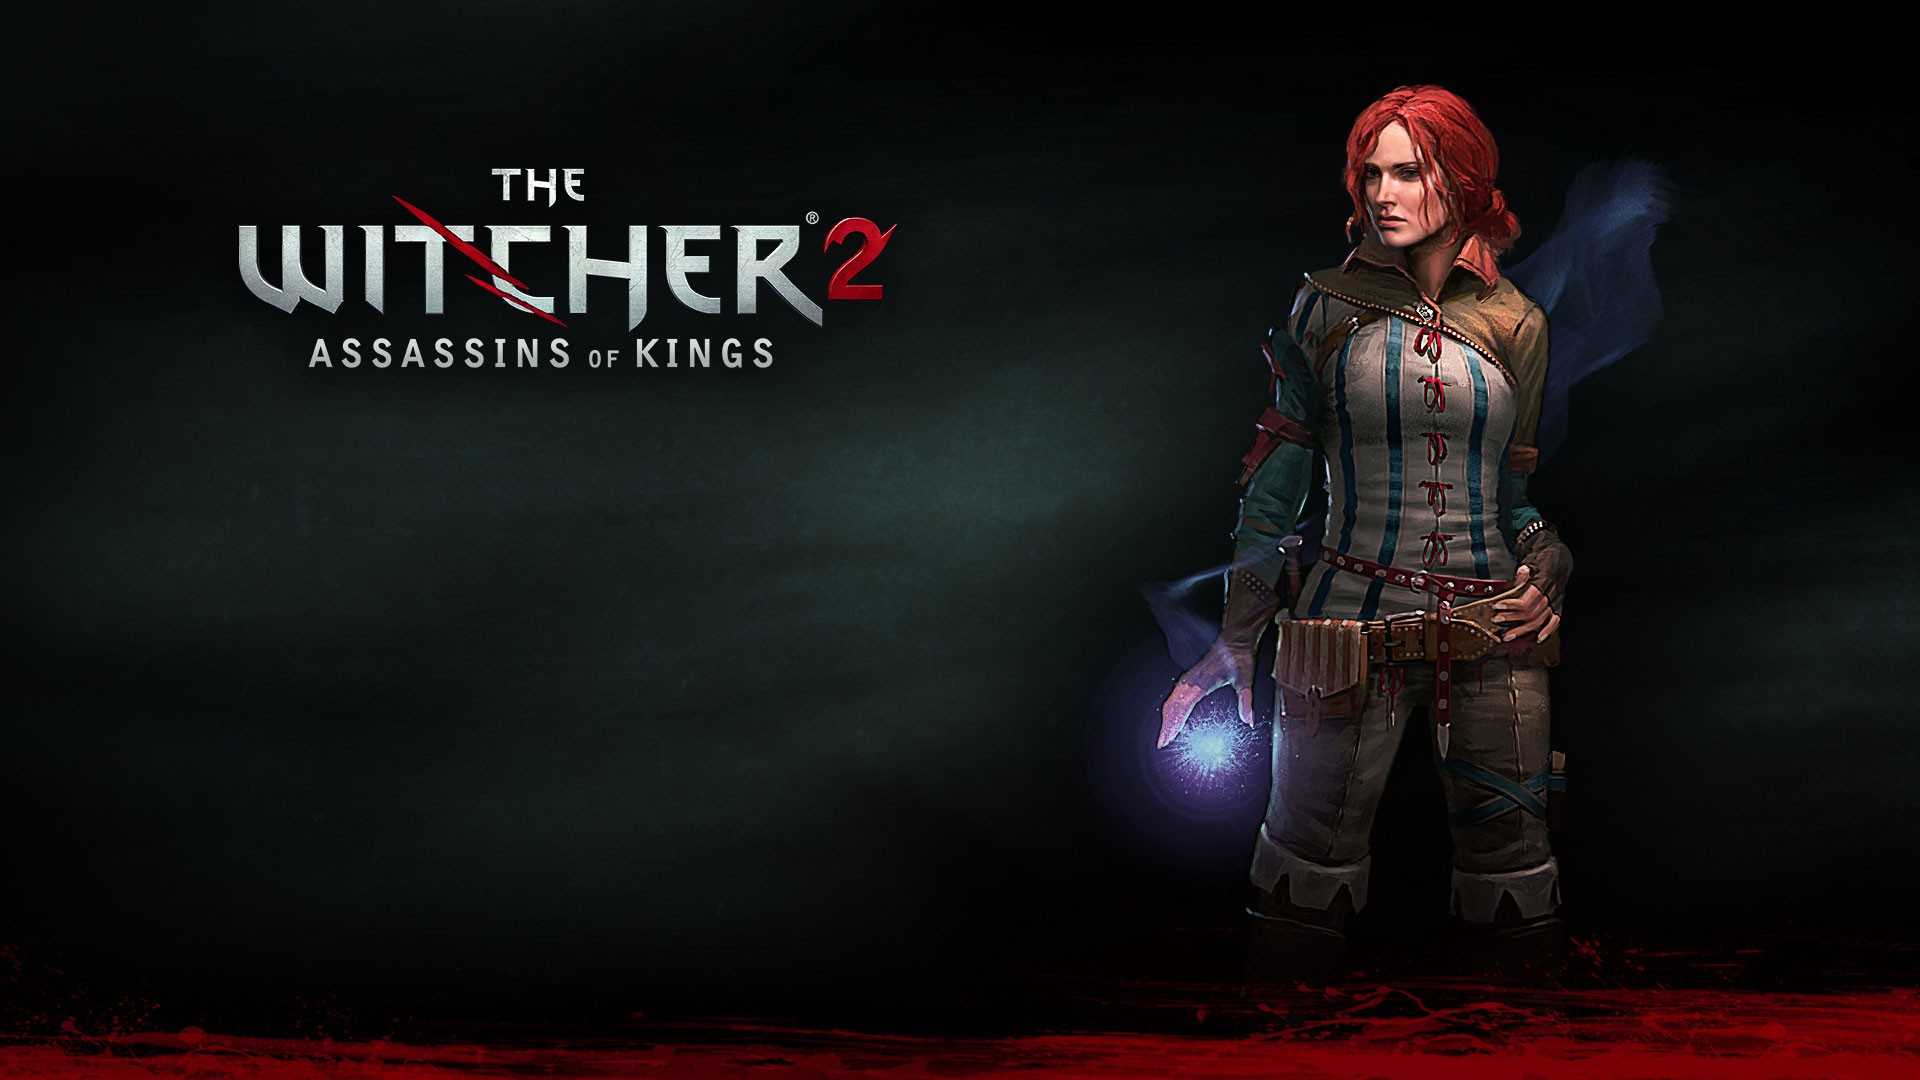 The Witcher 2 Assassins Of Kings, The Witcher, Triss Merigold Wallpaper